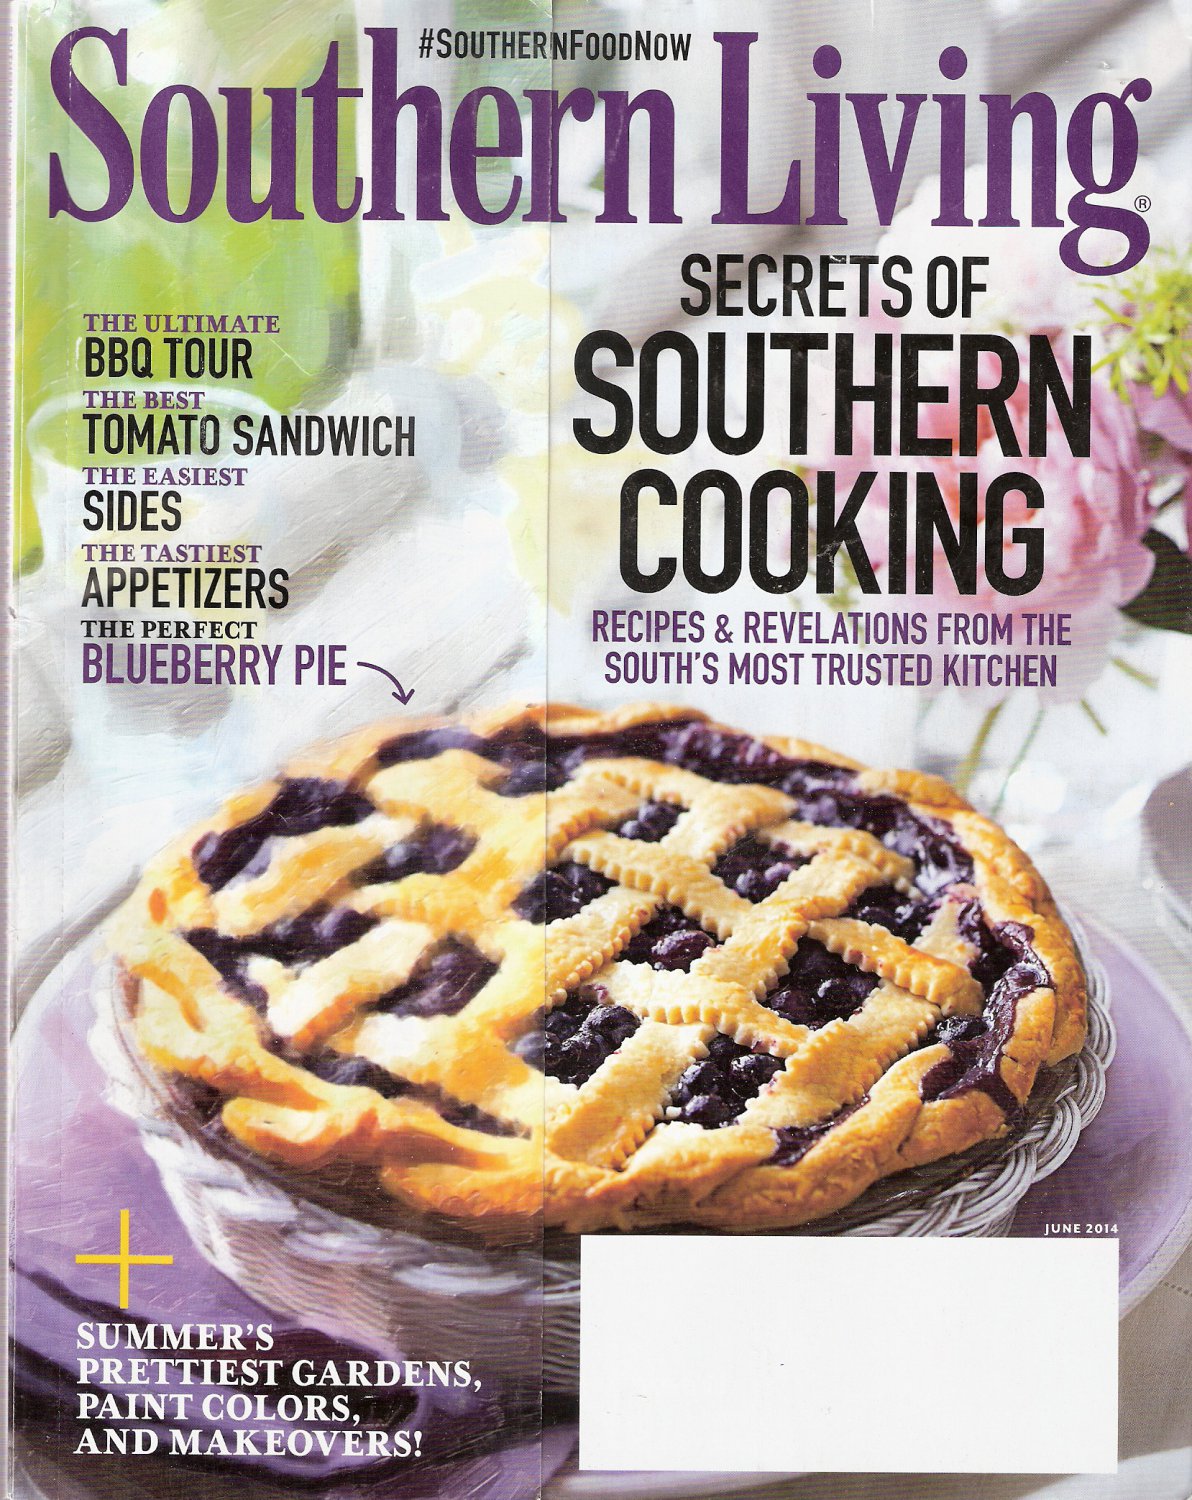 Southern Living Magazine June 2014 Secrets of Southern Cooking